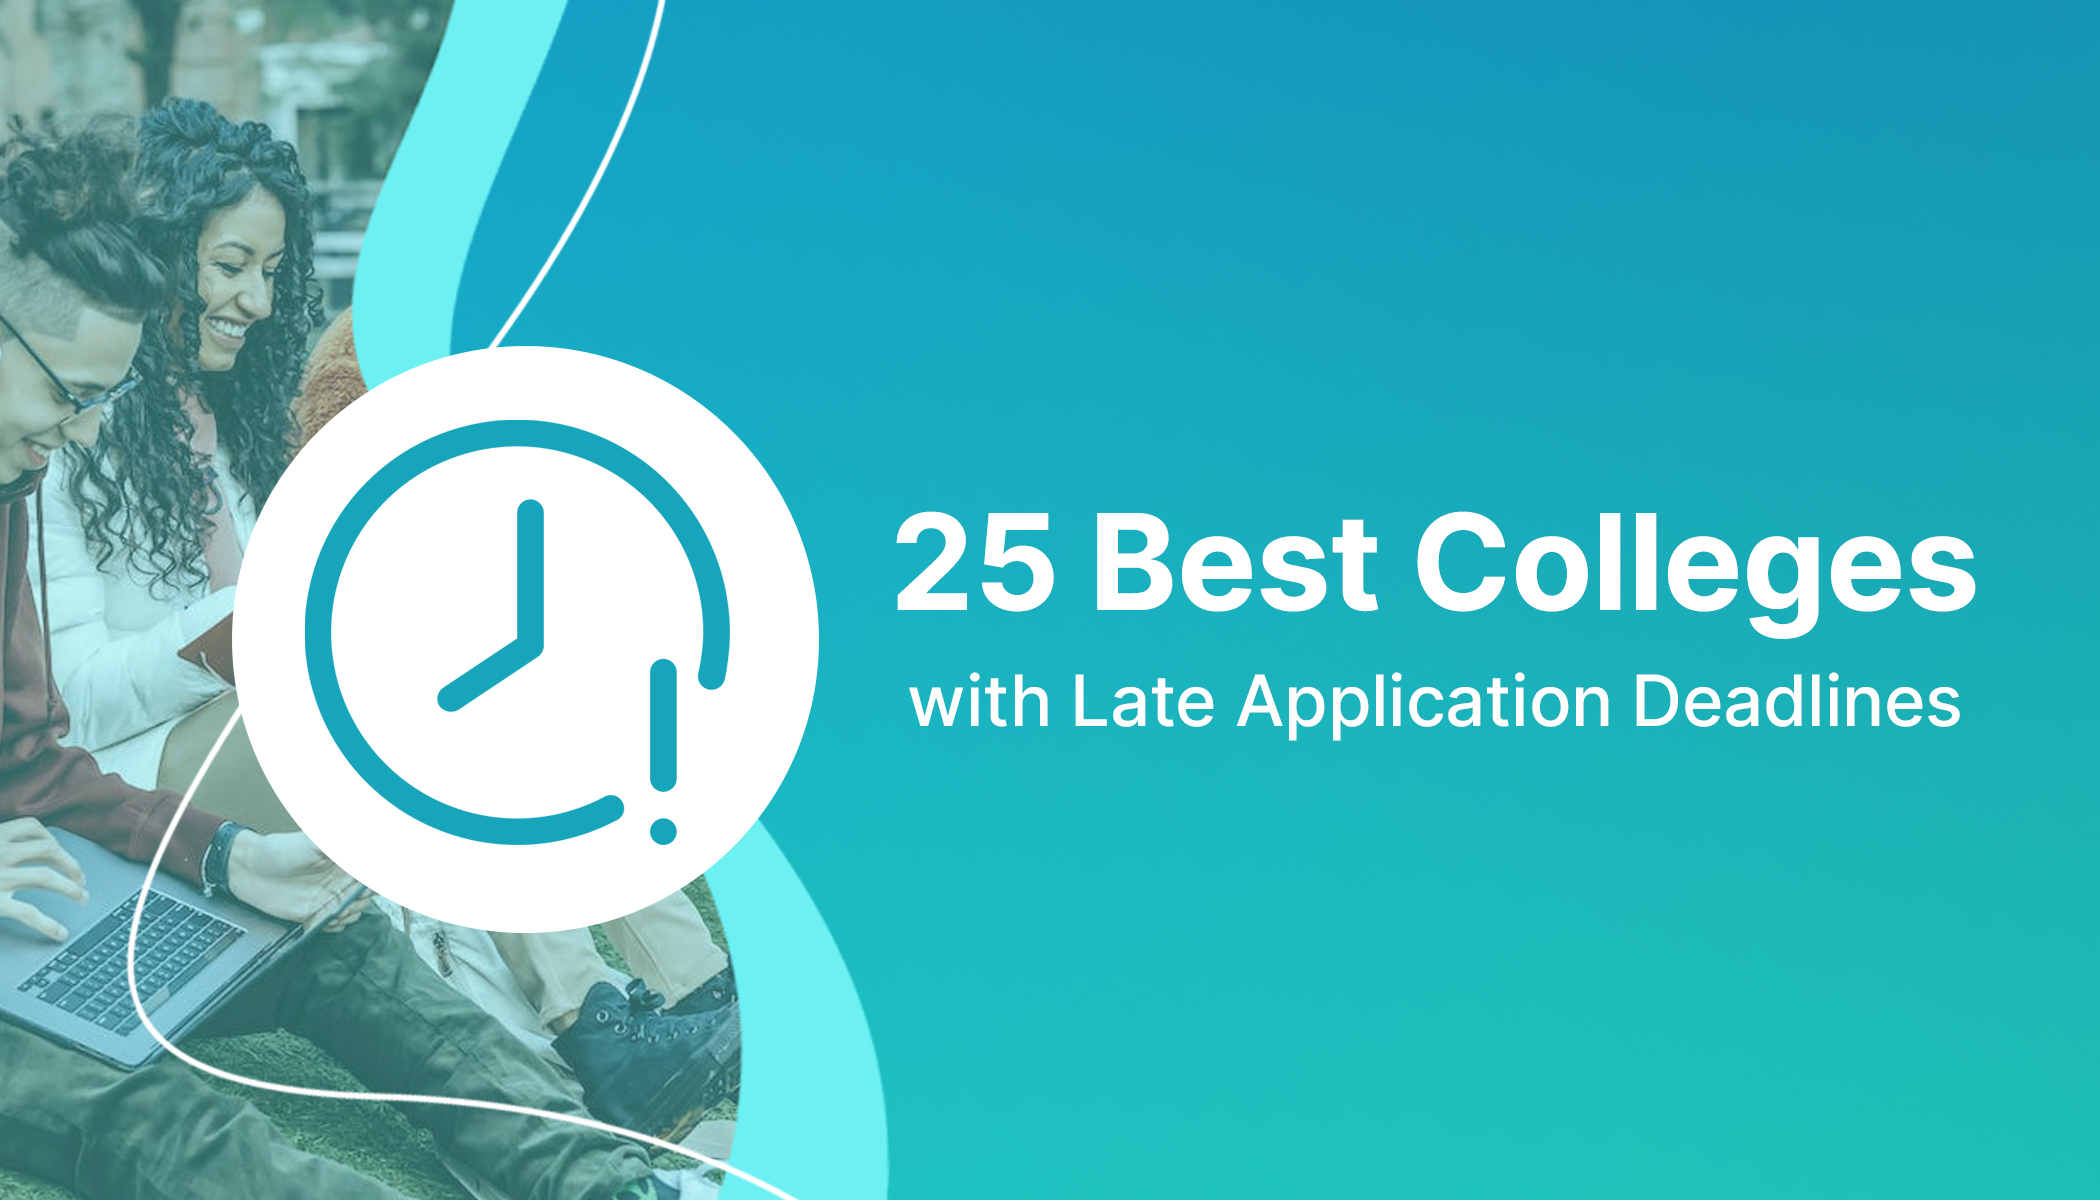 Colleges with Late Application Deadlines Top 25 List